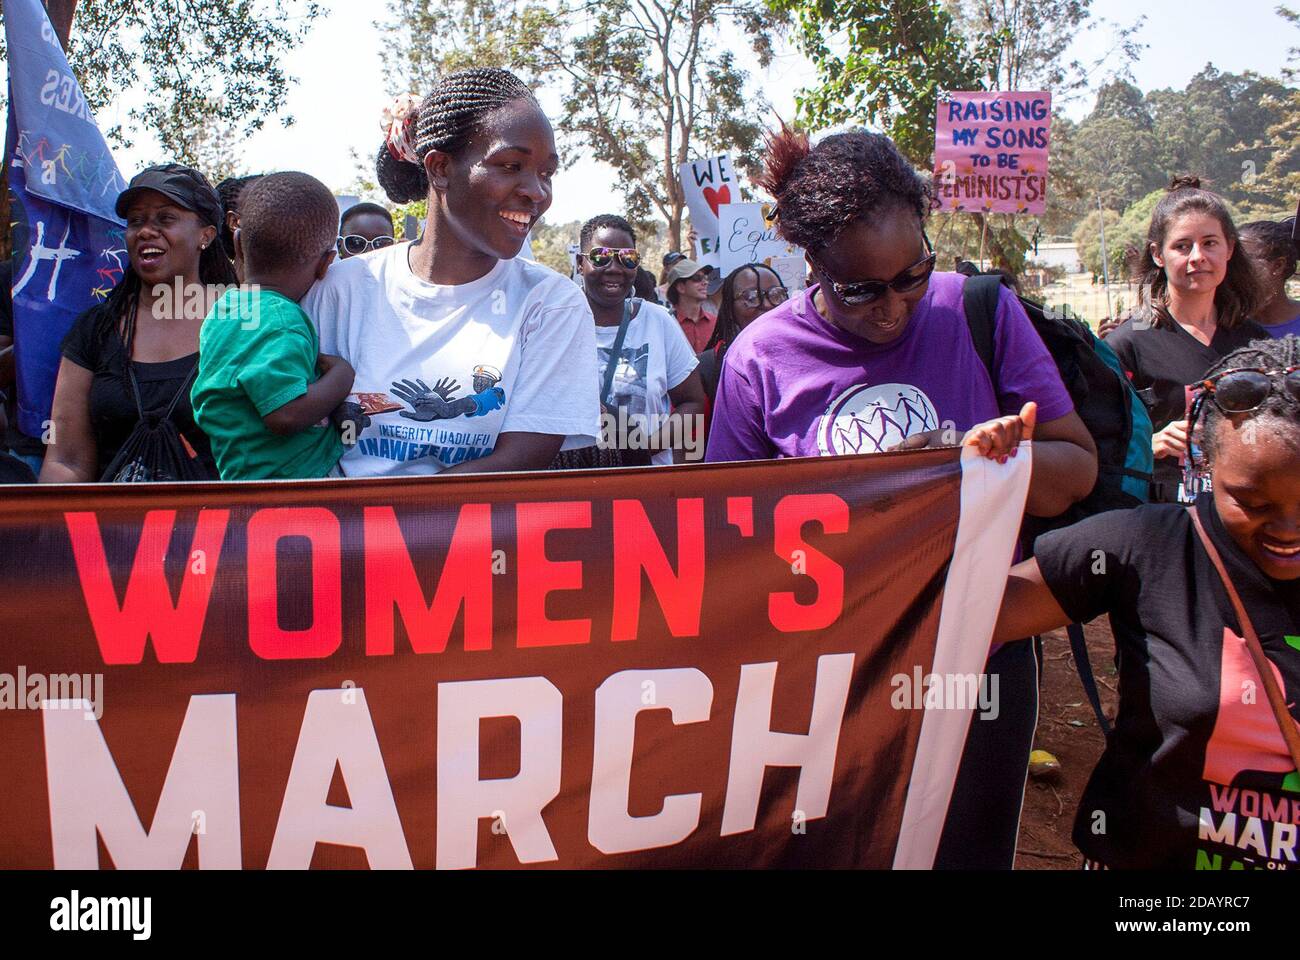 Activists marched in Nairobi, Kenya’s capital city, to promote women’s rights, the same day that similar marches occurred around the world in response to the inauguration of U.S. President Donald Trump. Stock Photo